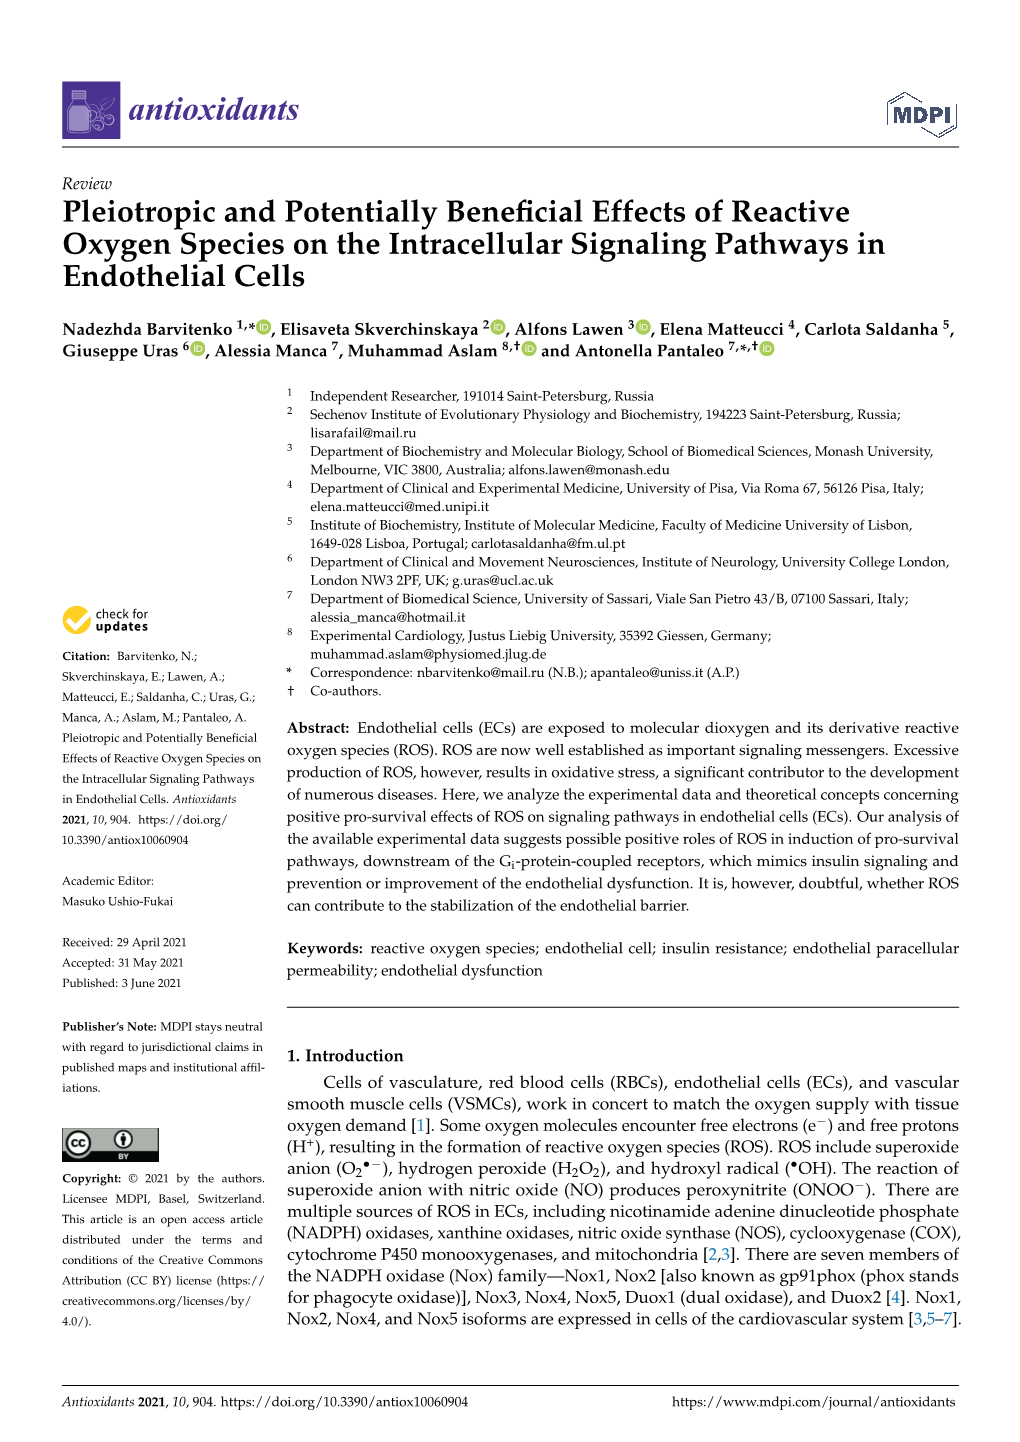 Pleiotropic and Potentially Beneficial Effects of Reactive Oxygen Species on the Intracellular Signaling Pathways in Endothelial